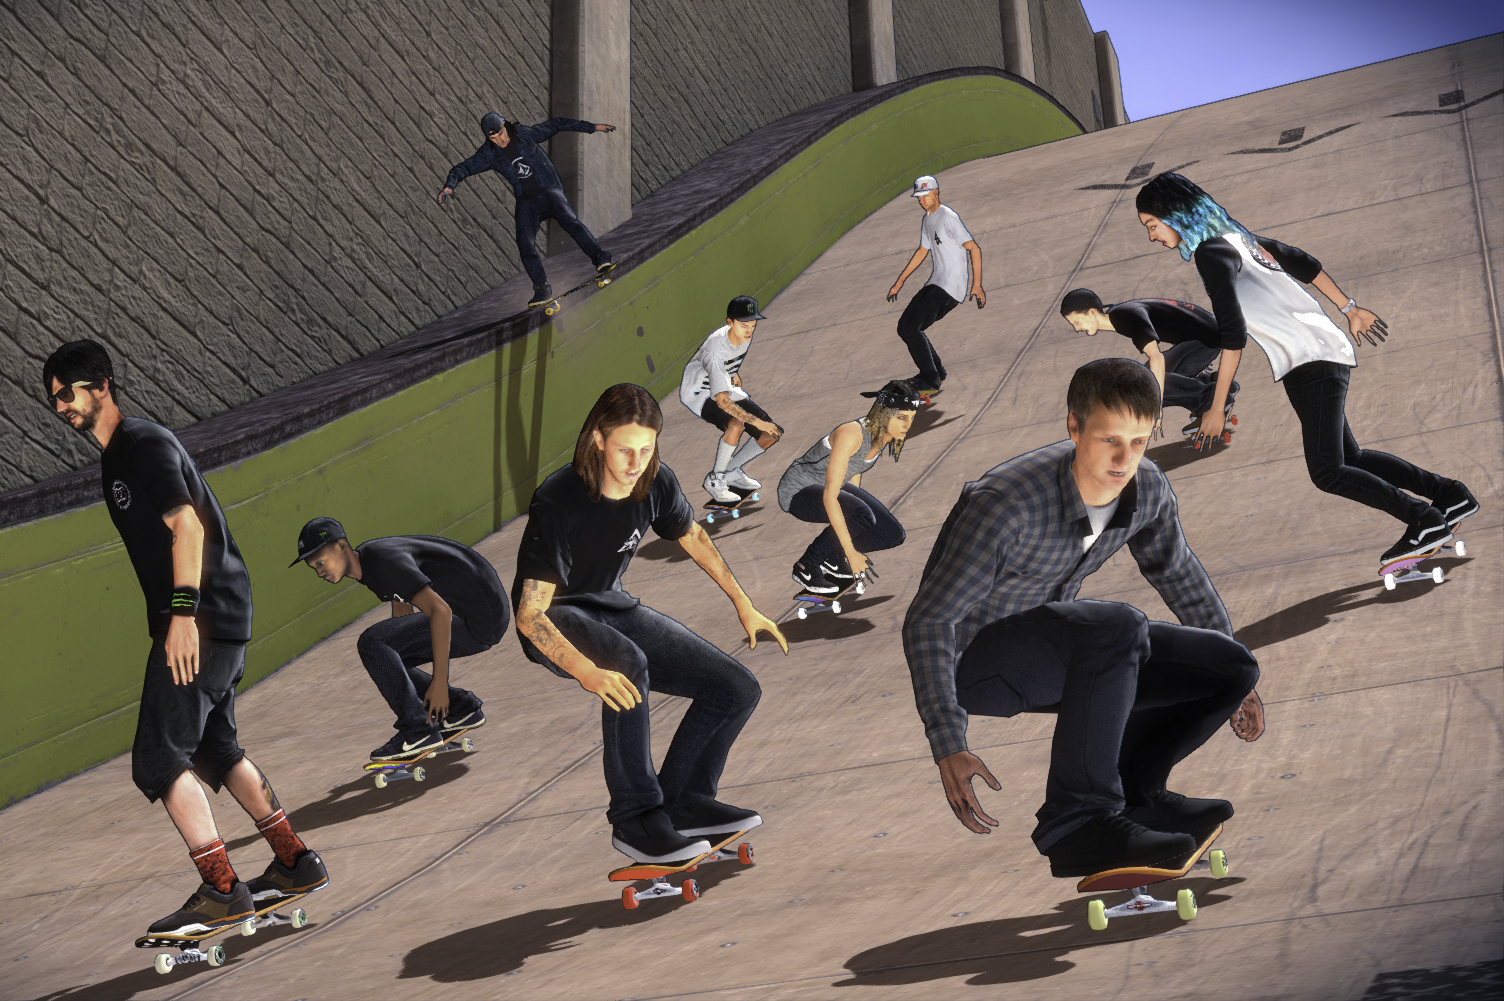 Tony Hawk Pro Skater 5 Review: Gameplay Videos, Features and